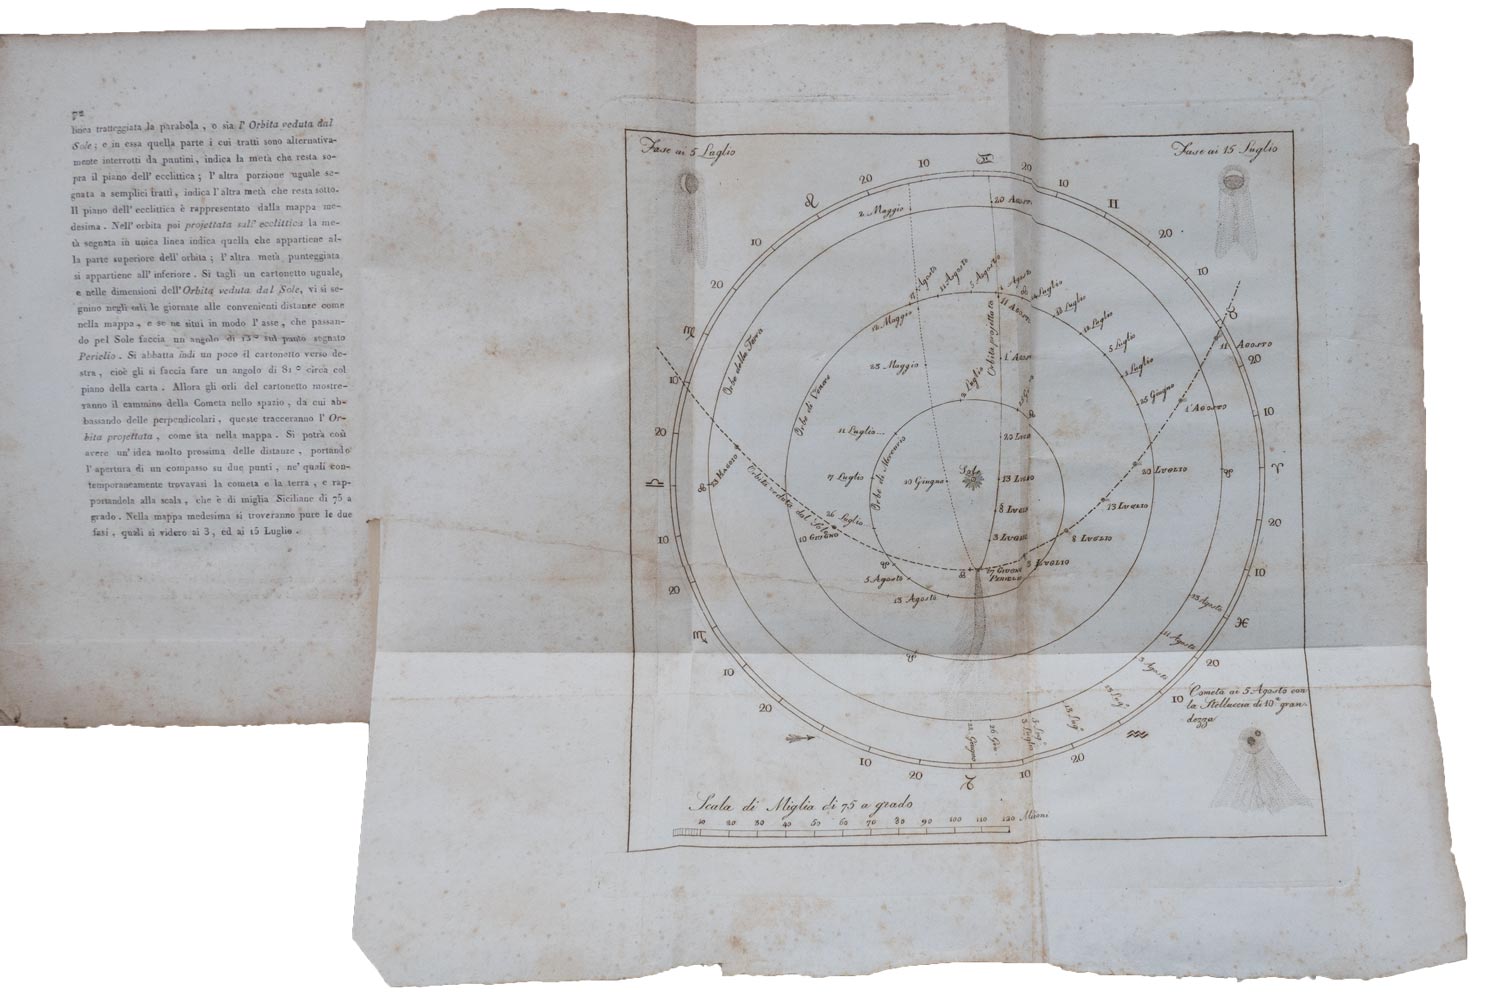 Old fold-out map records the path of the Great Comet of 1819. 